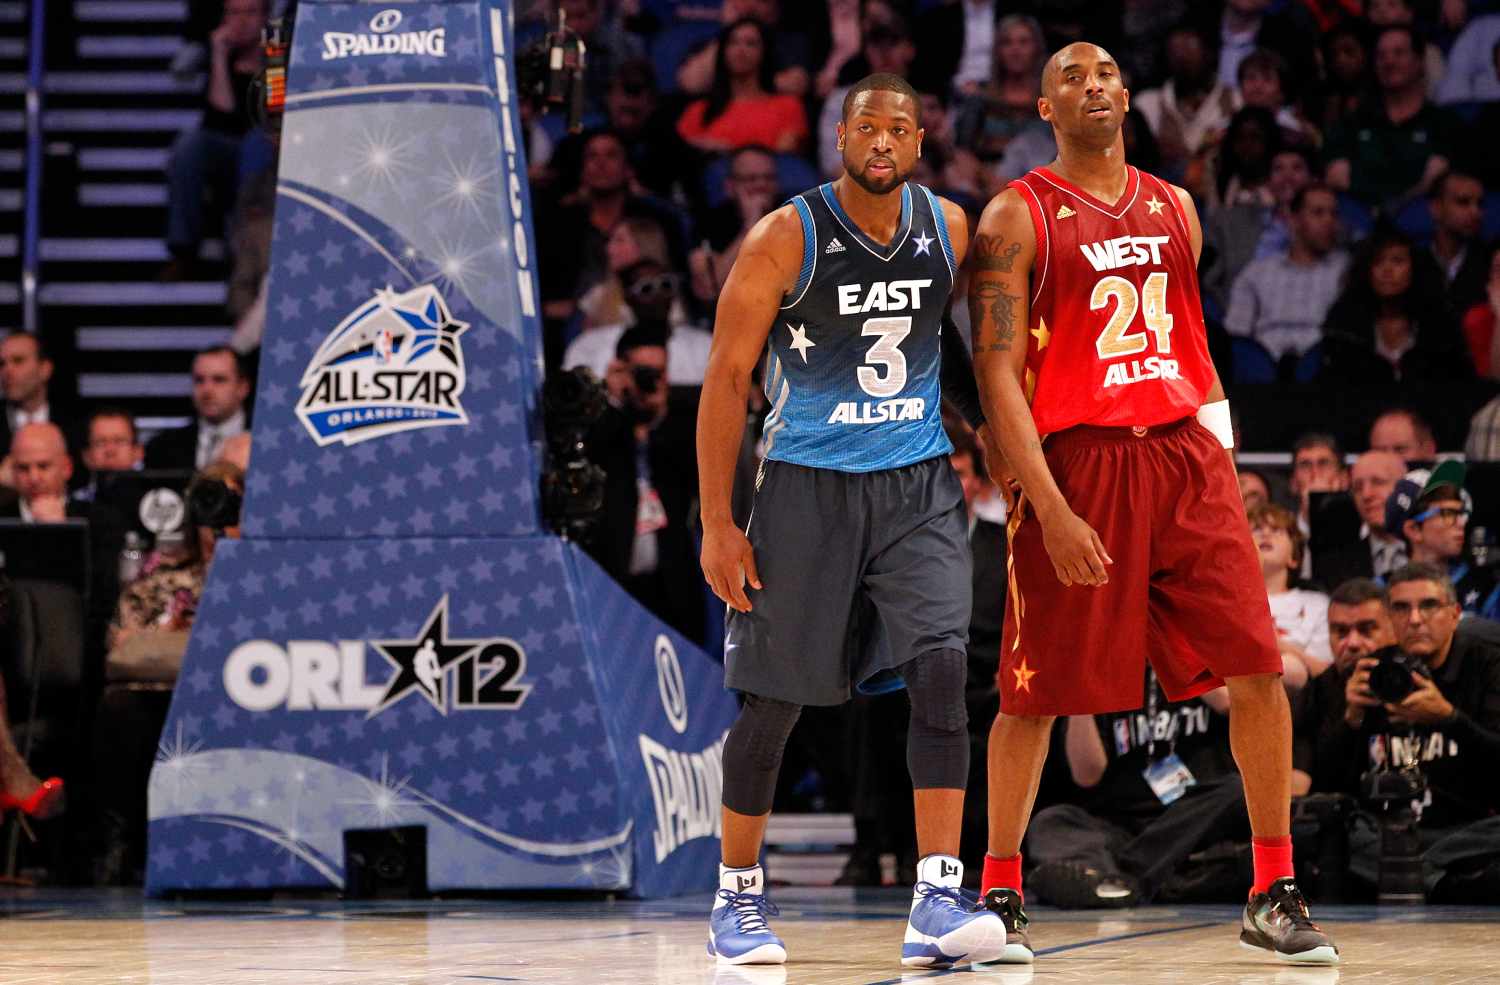 d wade all star